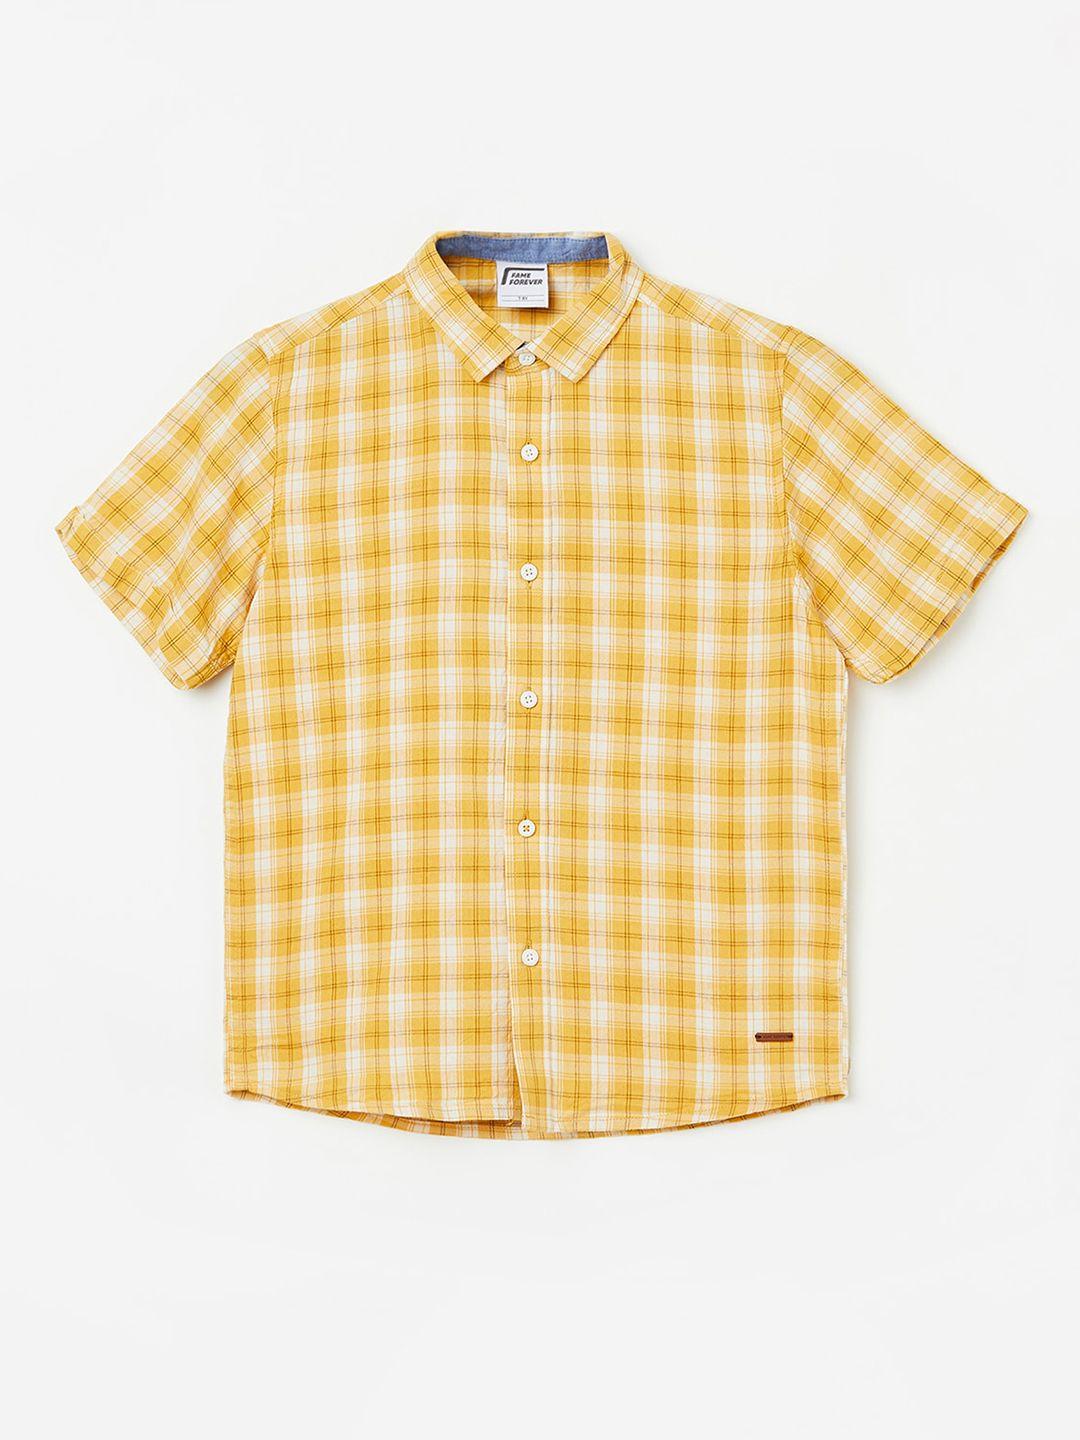 fame-forever-by-lifestyle-boys-gingham-checks-pure-cotton-casual-shirt